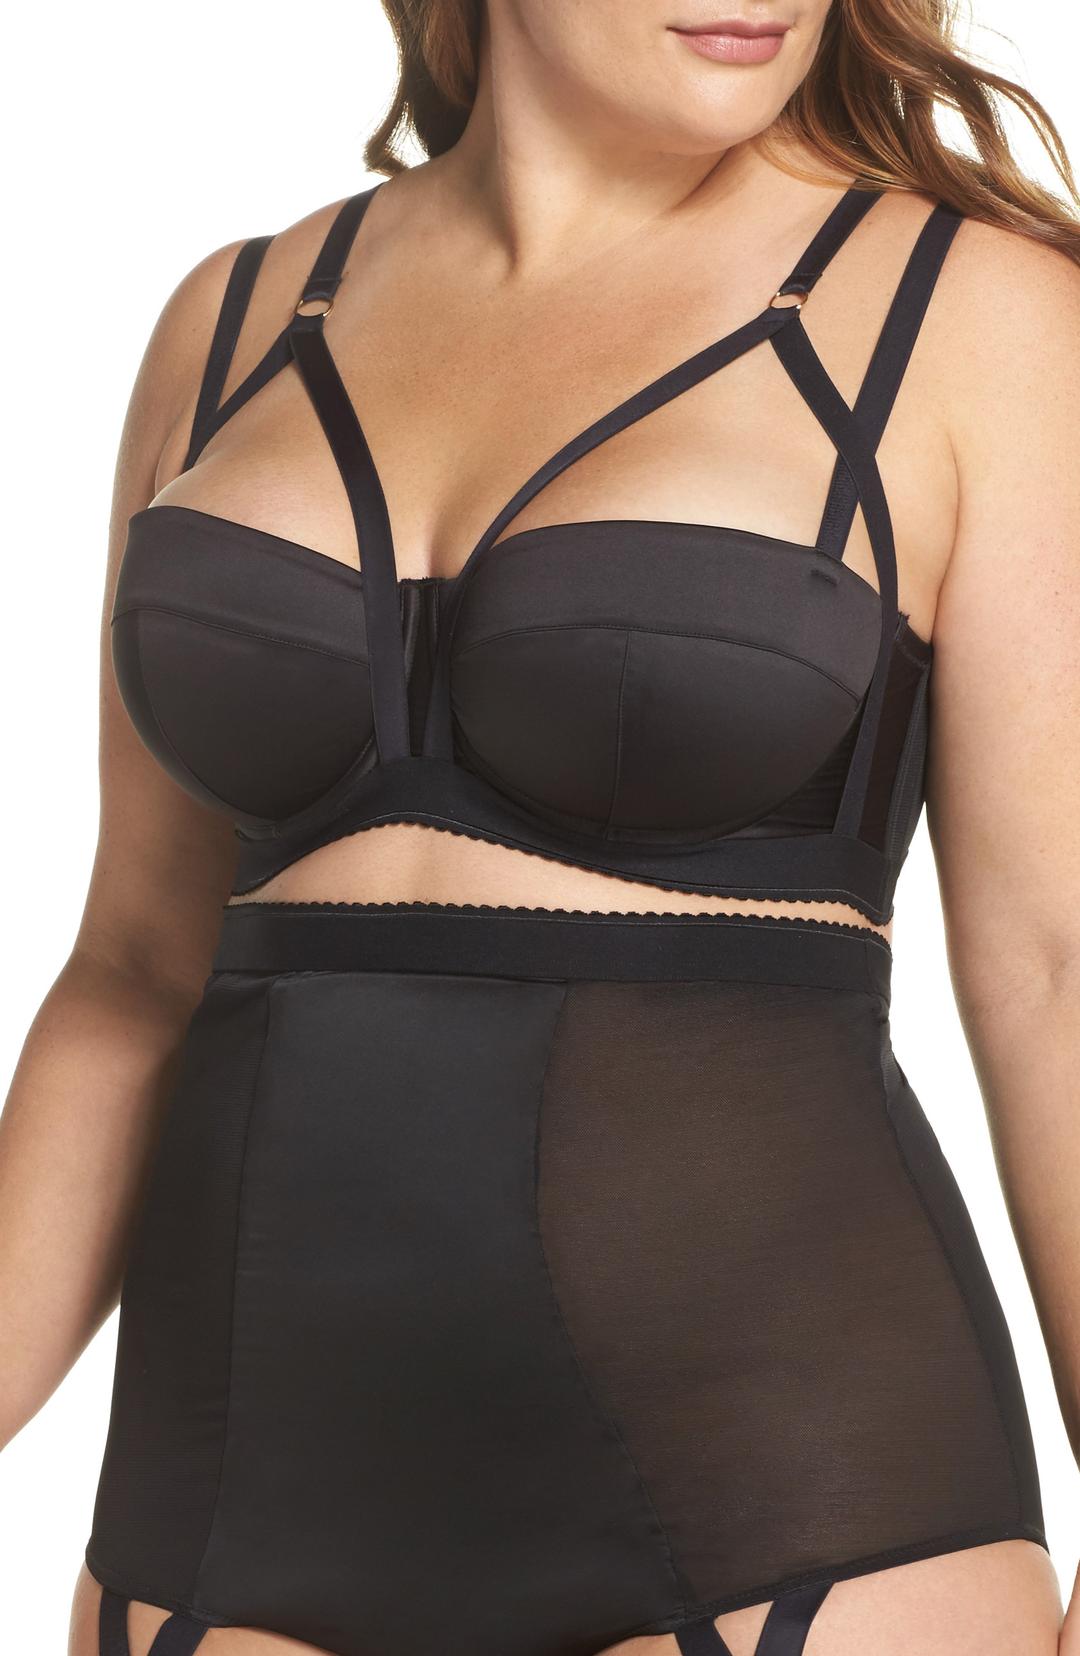 4 Bra-Fitting Tips an Expert Wants You to Know